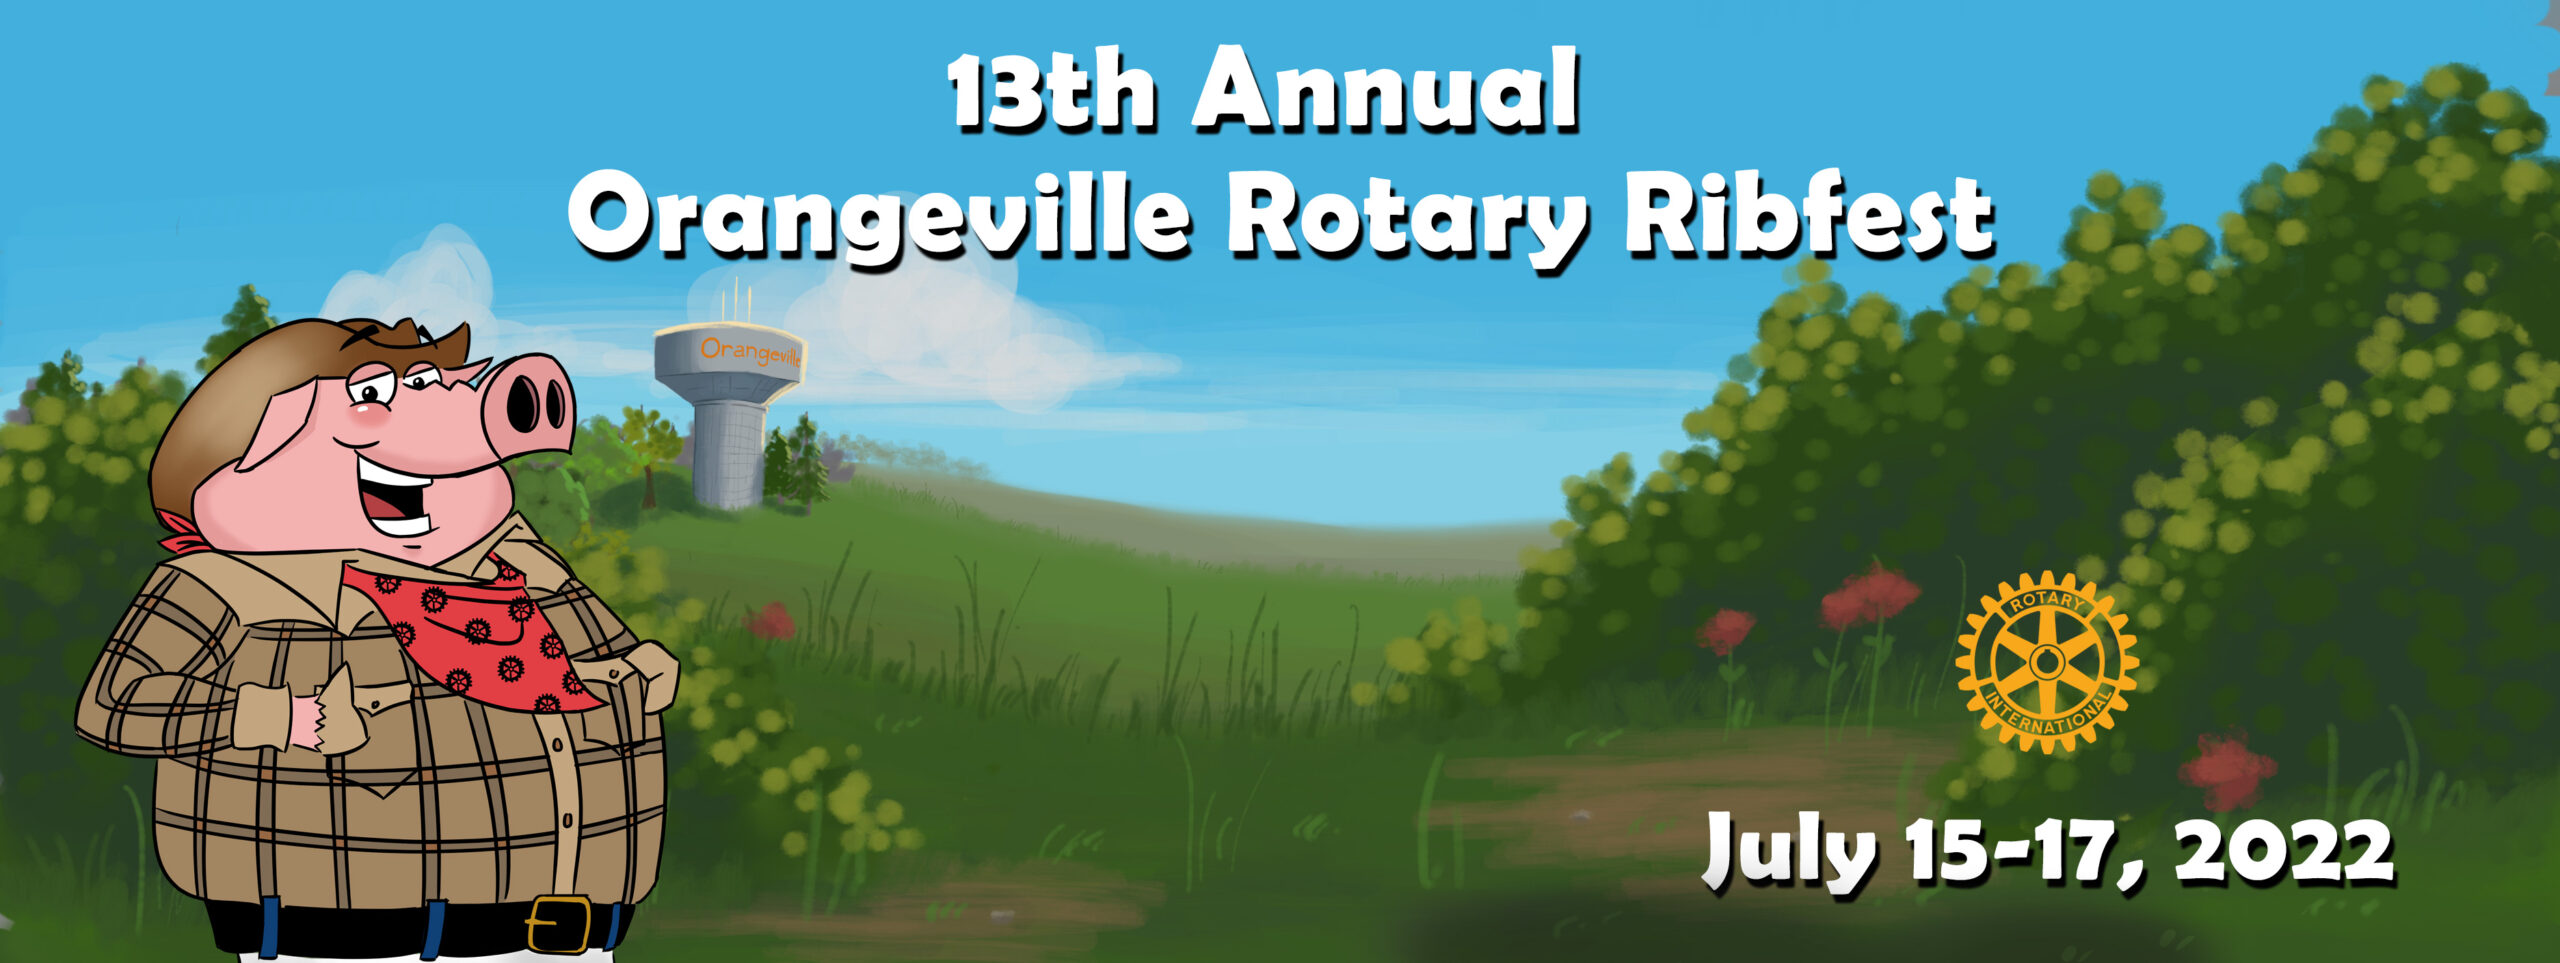 Mascot in field with text, 13th Annual Orangeville Rotary Ribfest